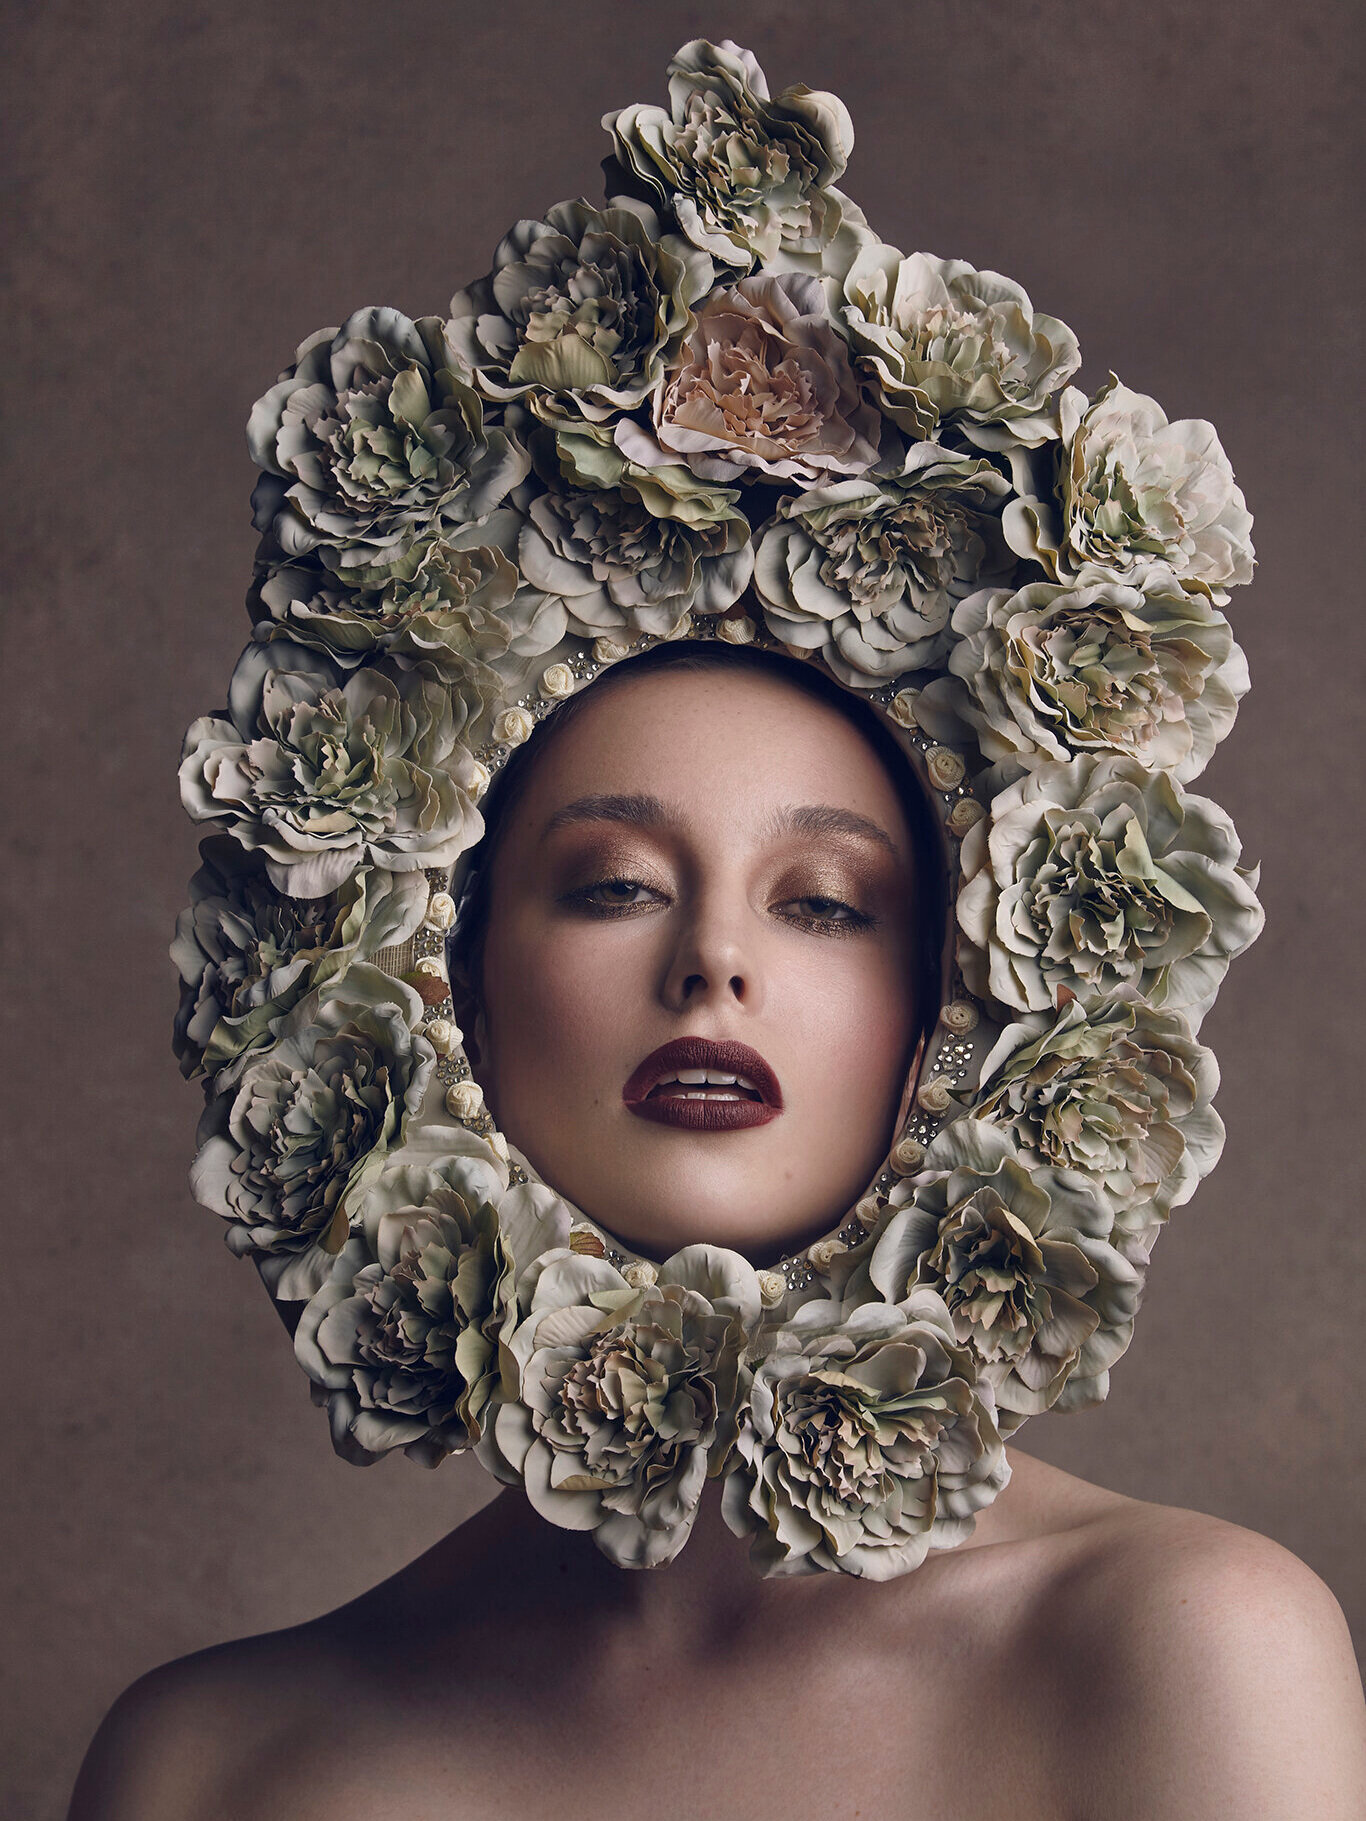 The-Flower-Book-by-Dana-Cole-floral-headpiece-model-fashion-photography-fine-art-photography-beauty-photo-floral-shoot-3.jpg